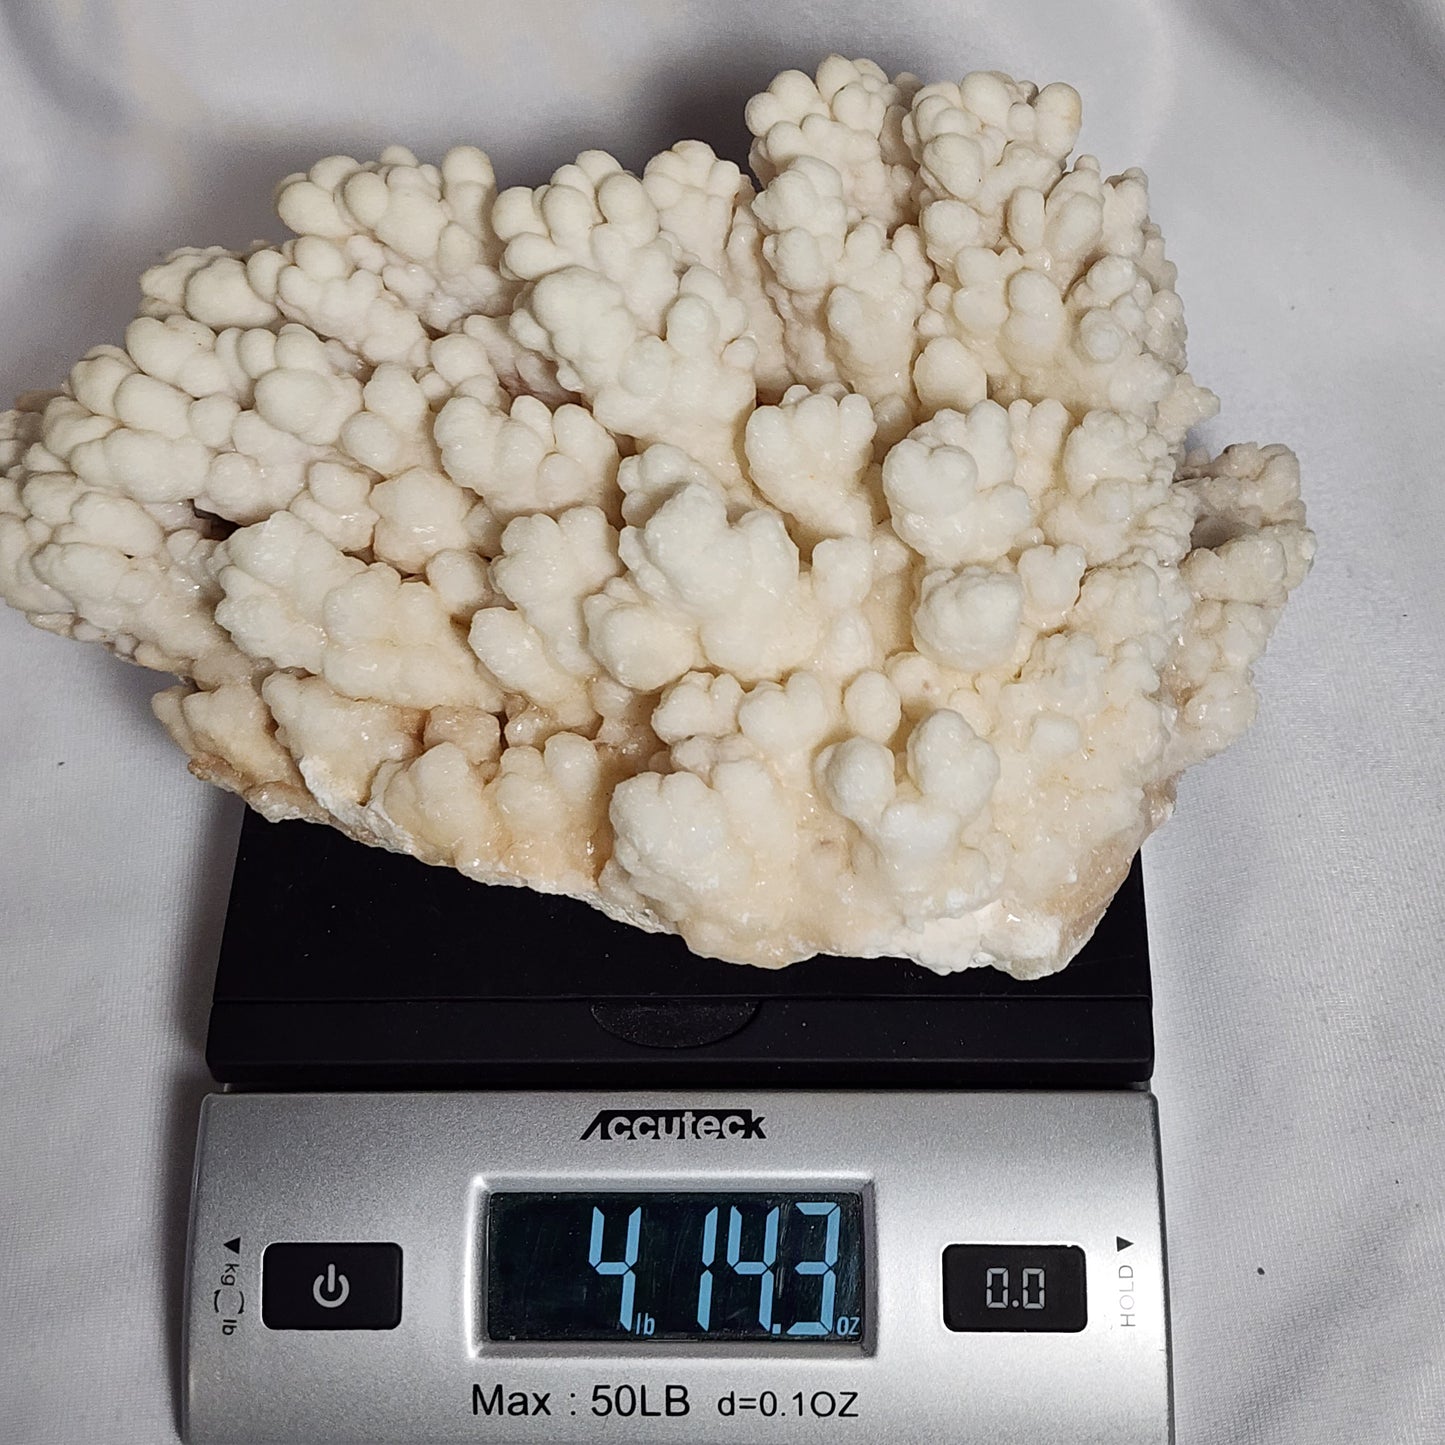 Fascinating Cave Calcite Cluster from Morocco